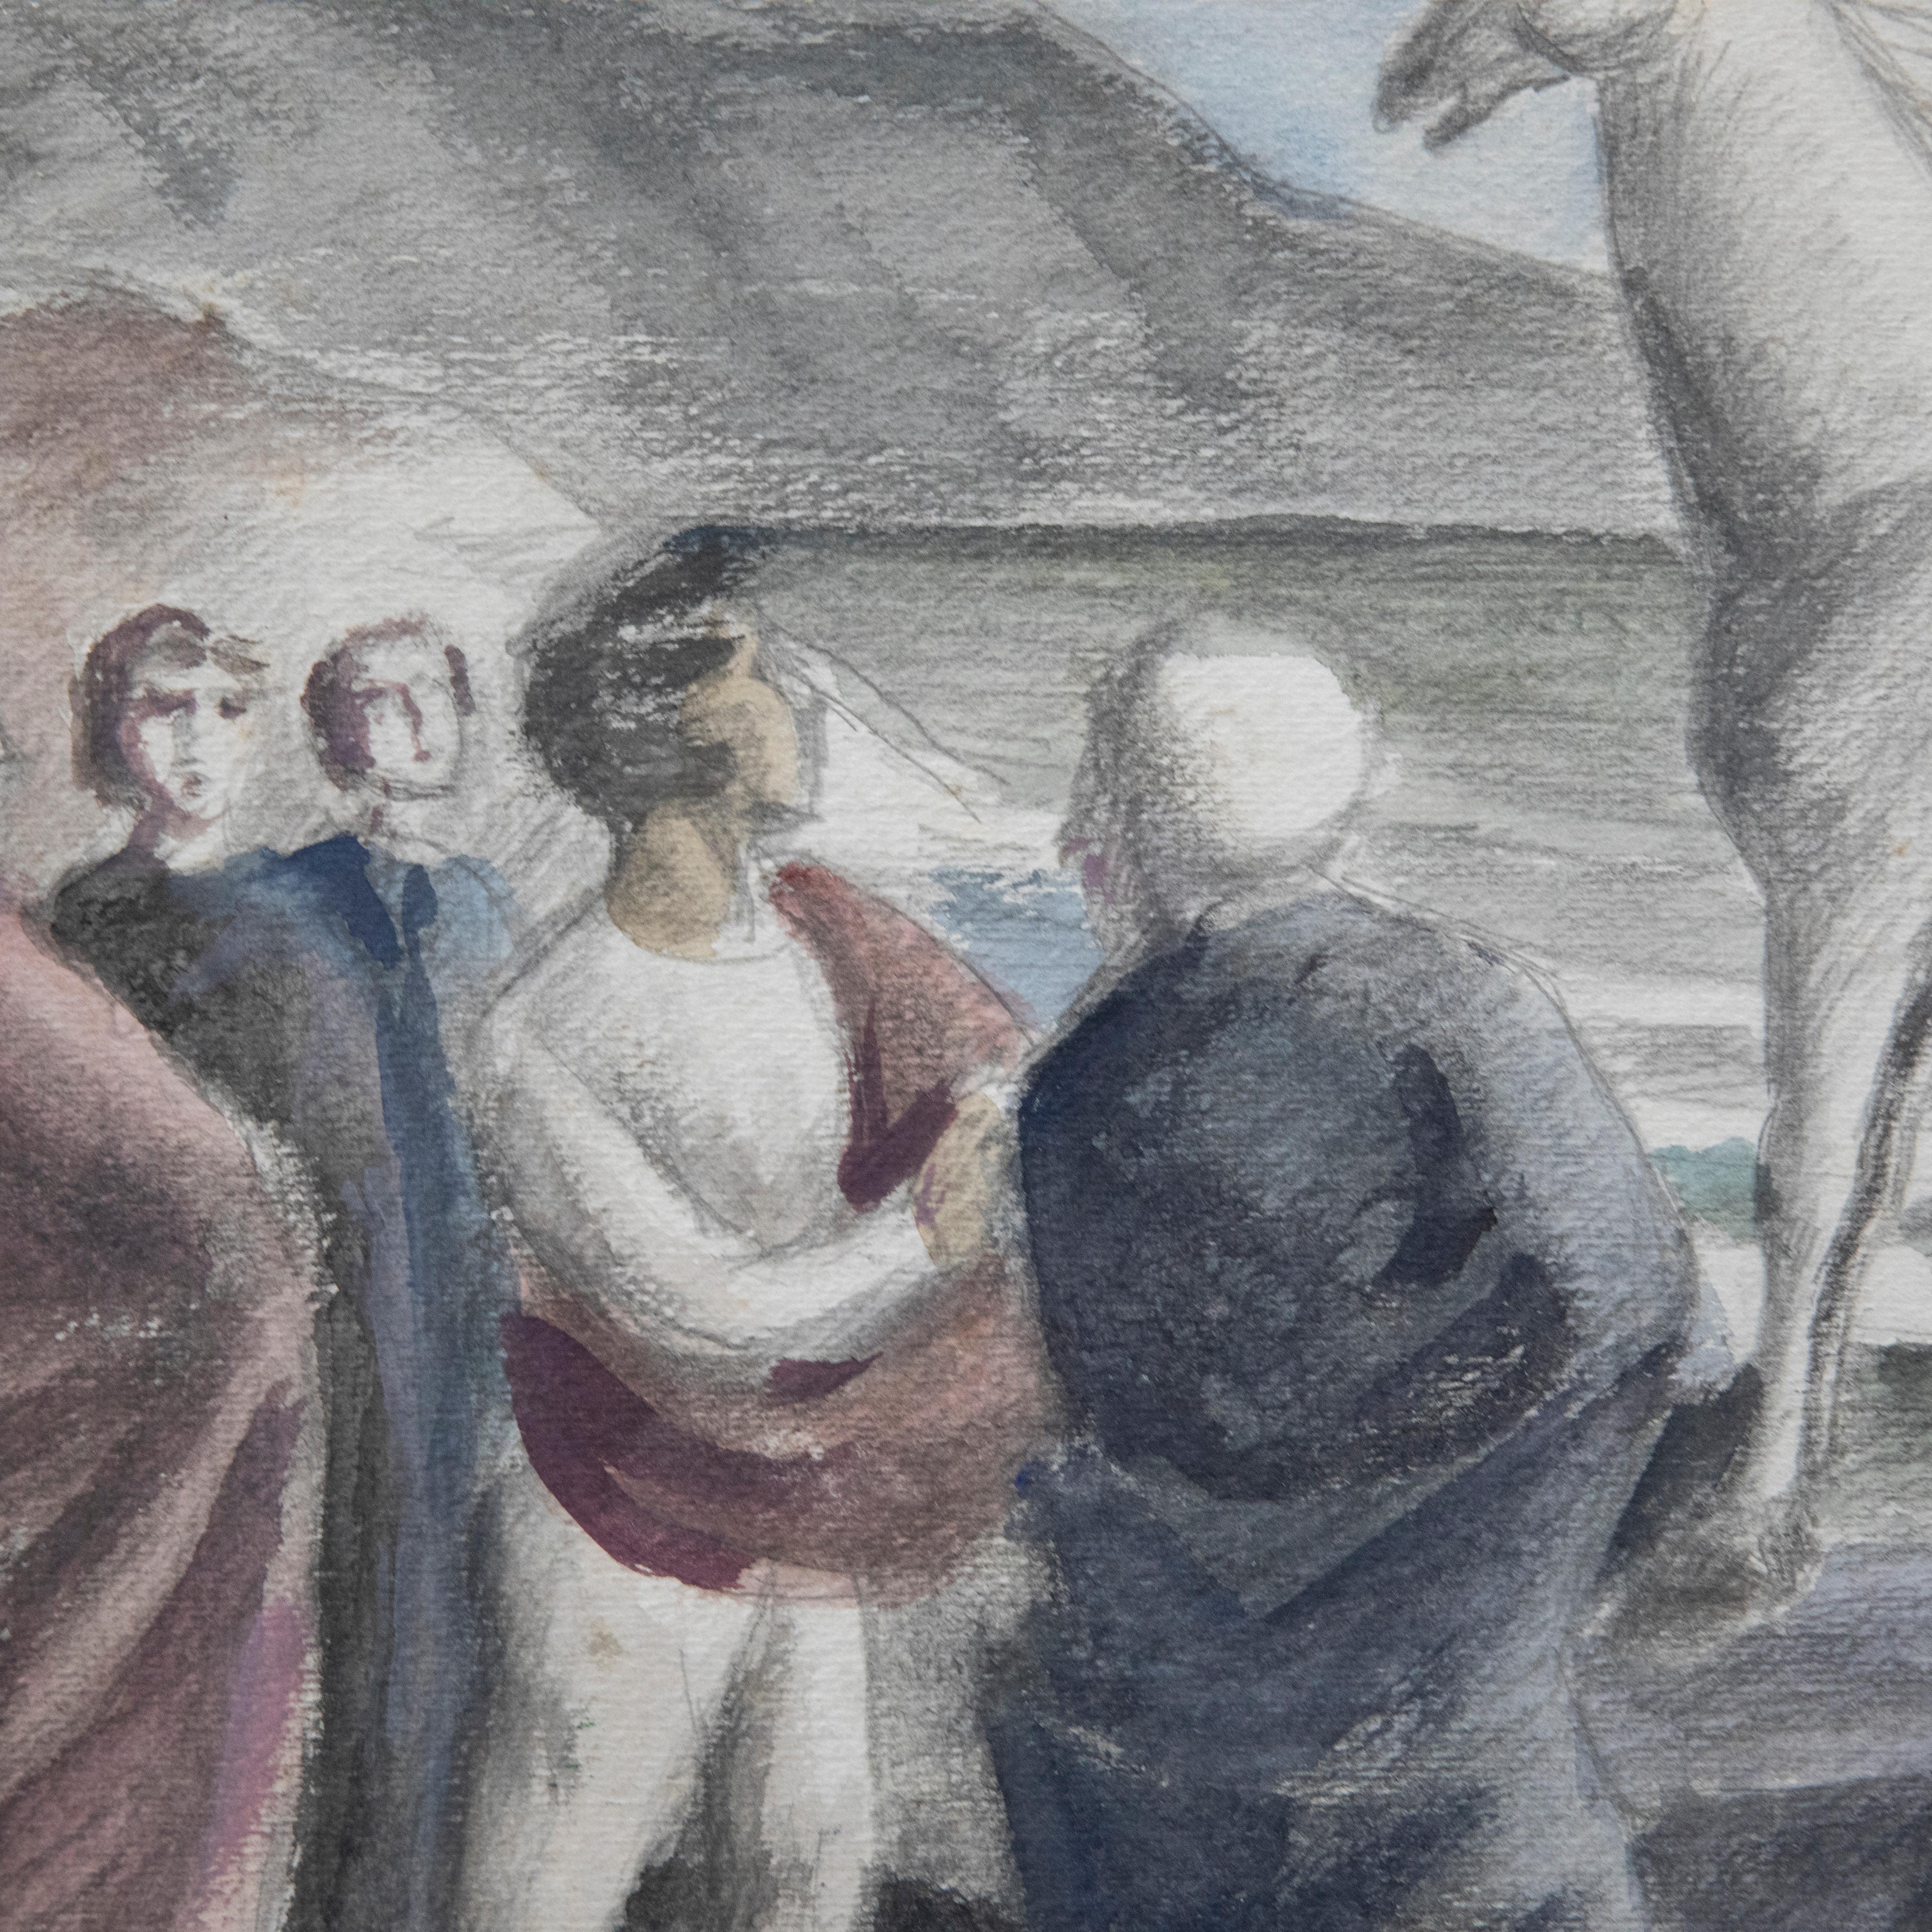 A striking scene depicting a boy on horseback alerting a group of people on the beach pointing into the distance as the concerned people gather. The scene shows classical inspiration in the statuesque poise of the figures and their traditional